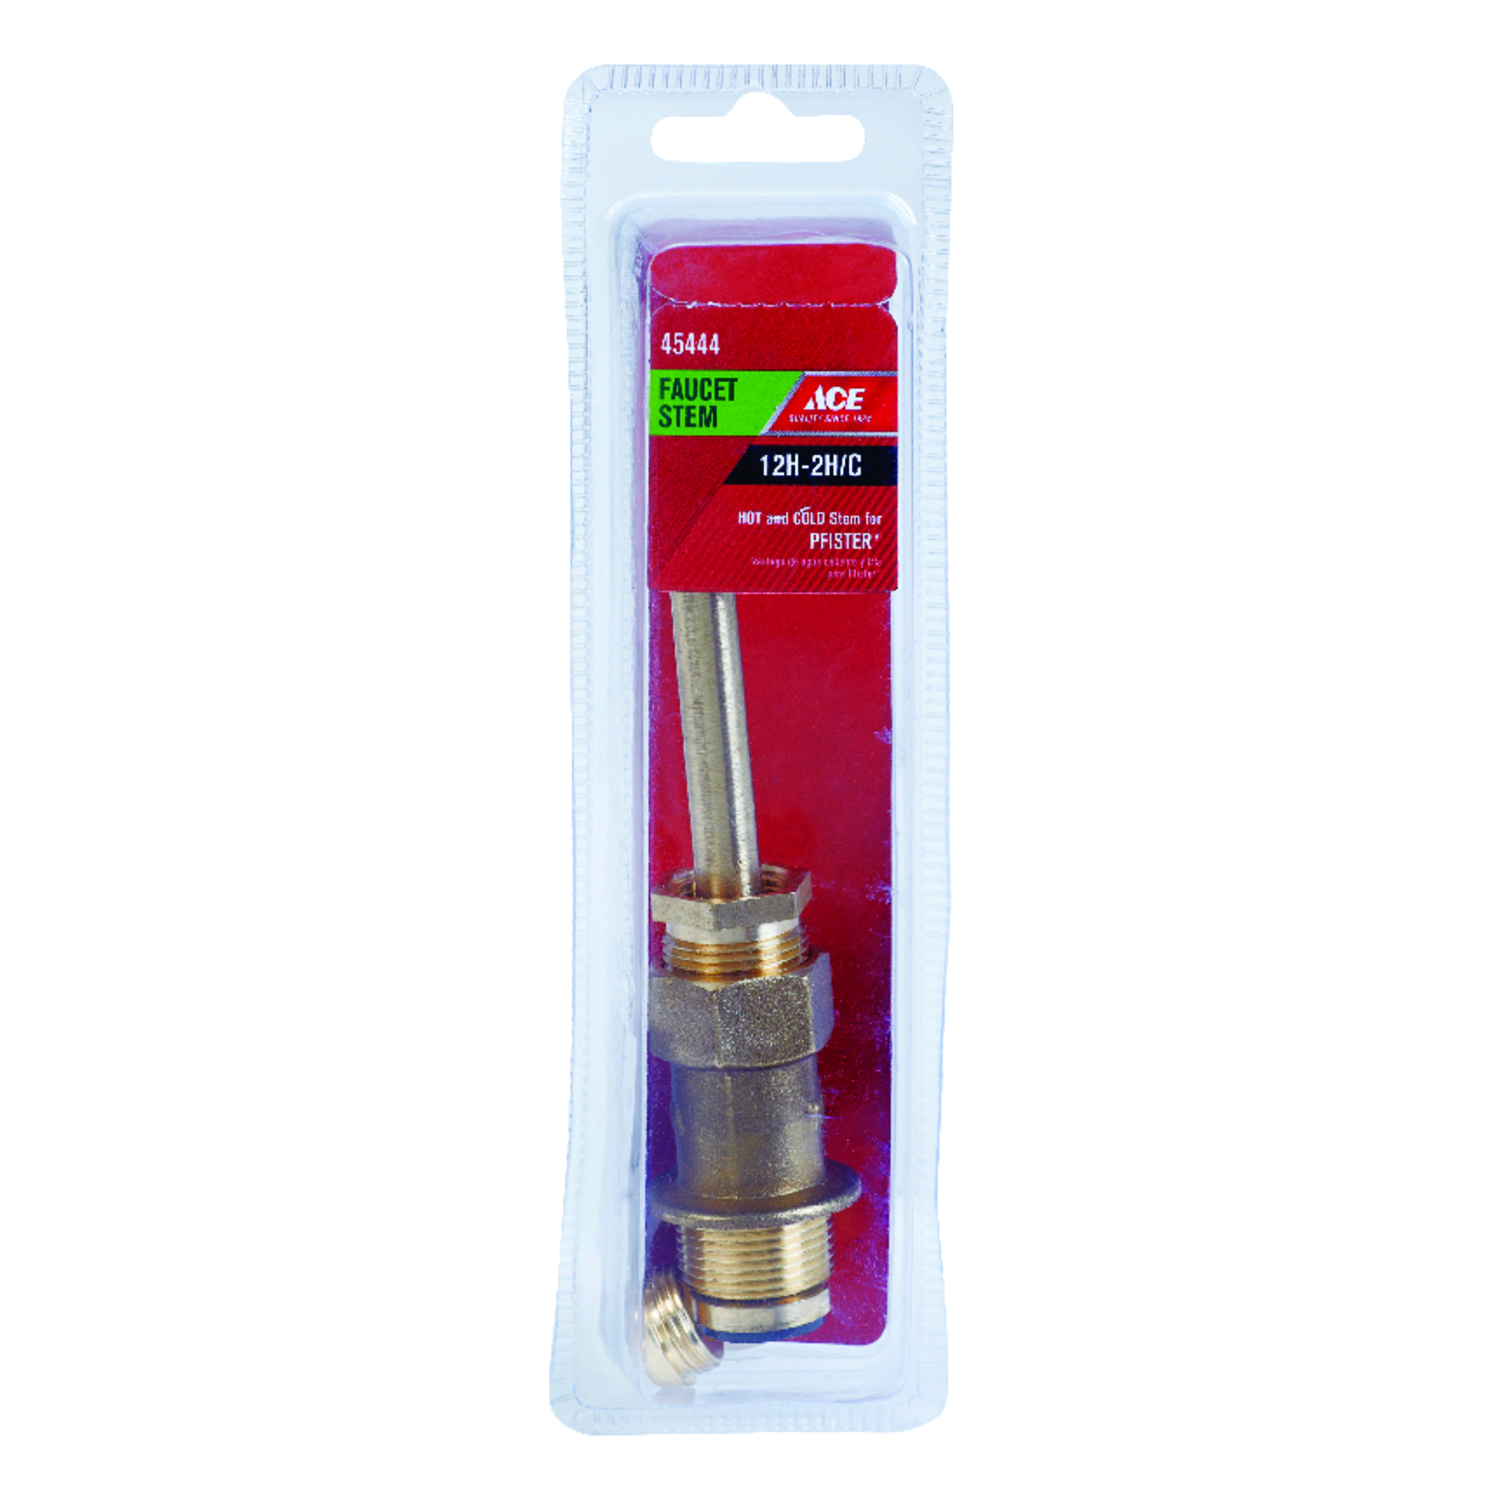 Ace 12H-2H/C Hot and Cold Faucet Stem For Pfister - Ace Hardware